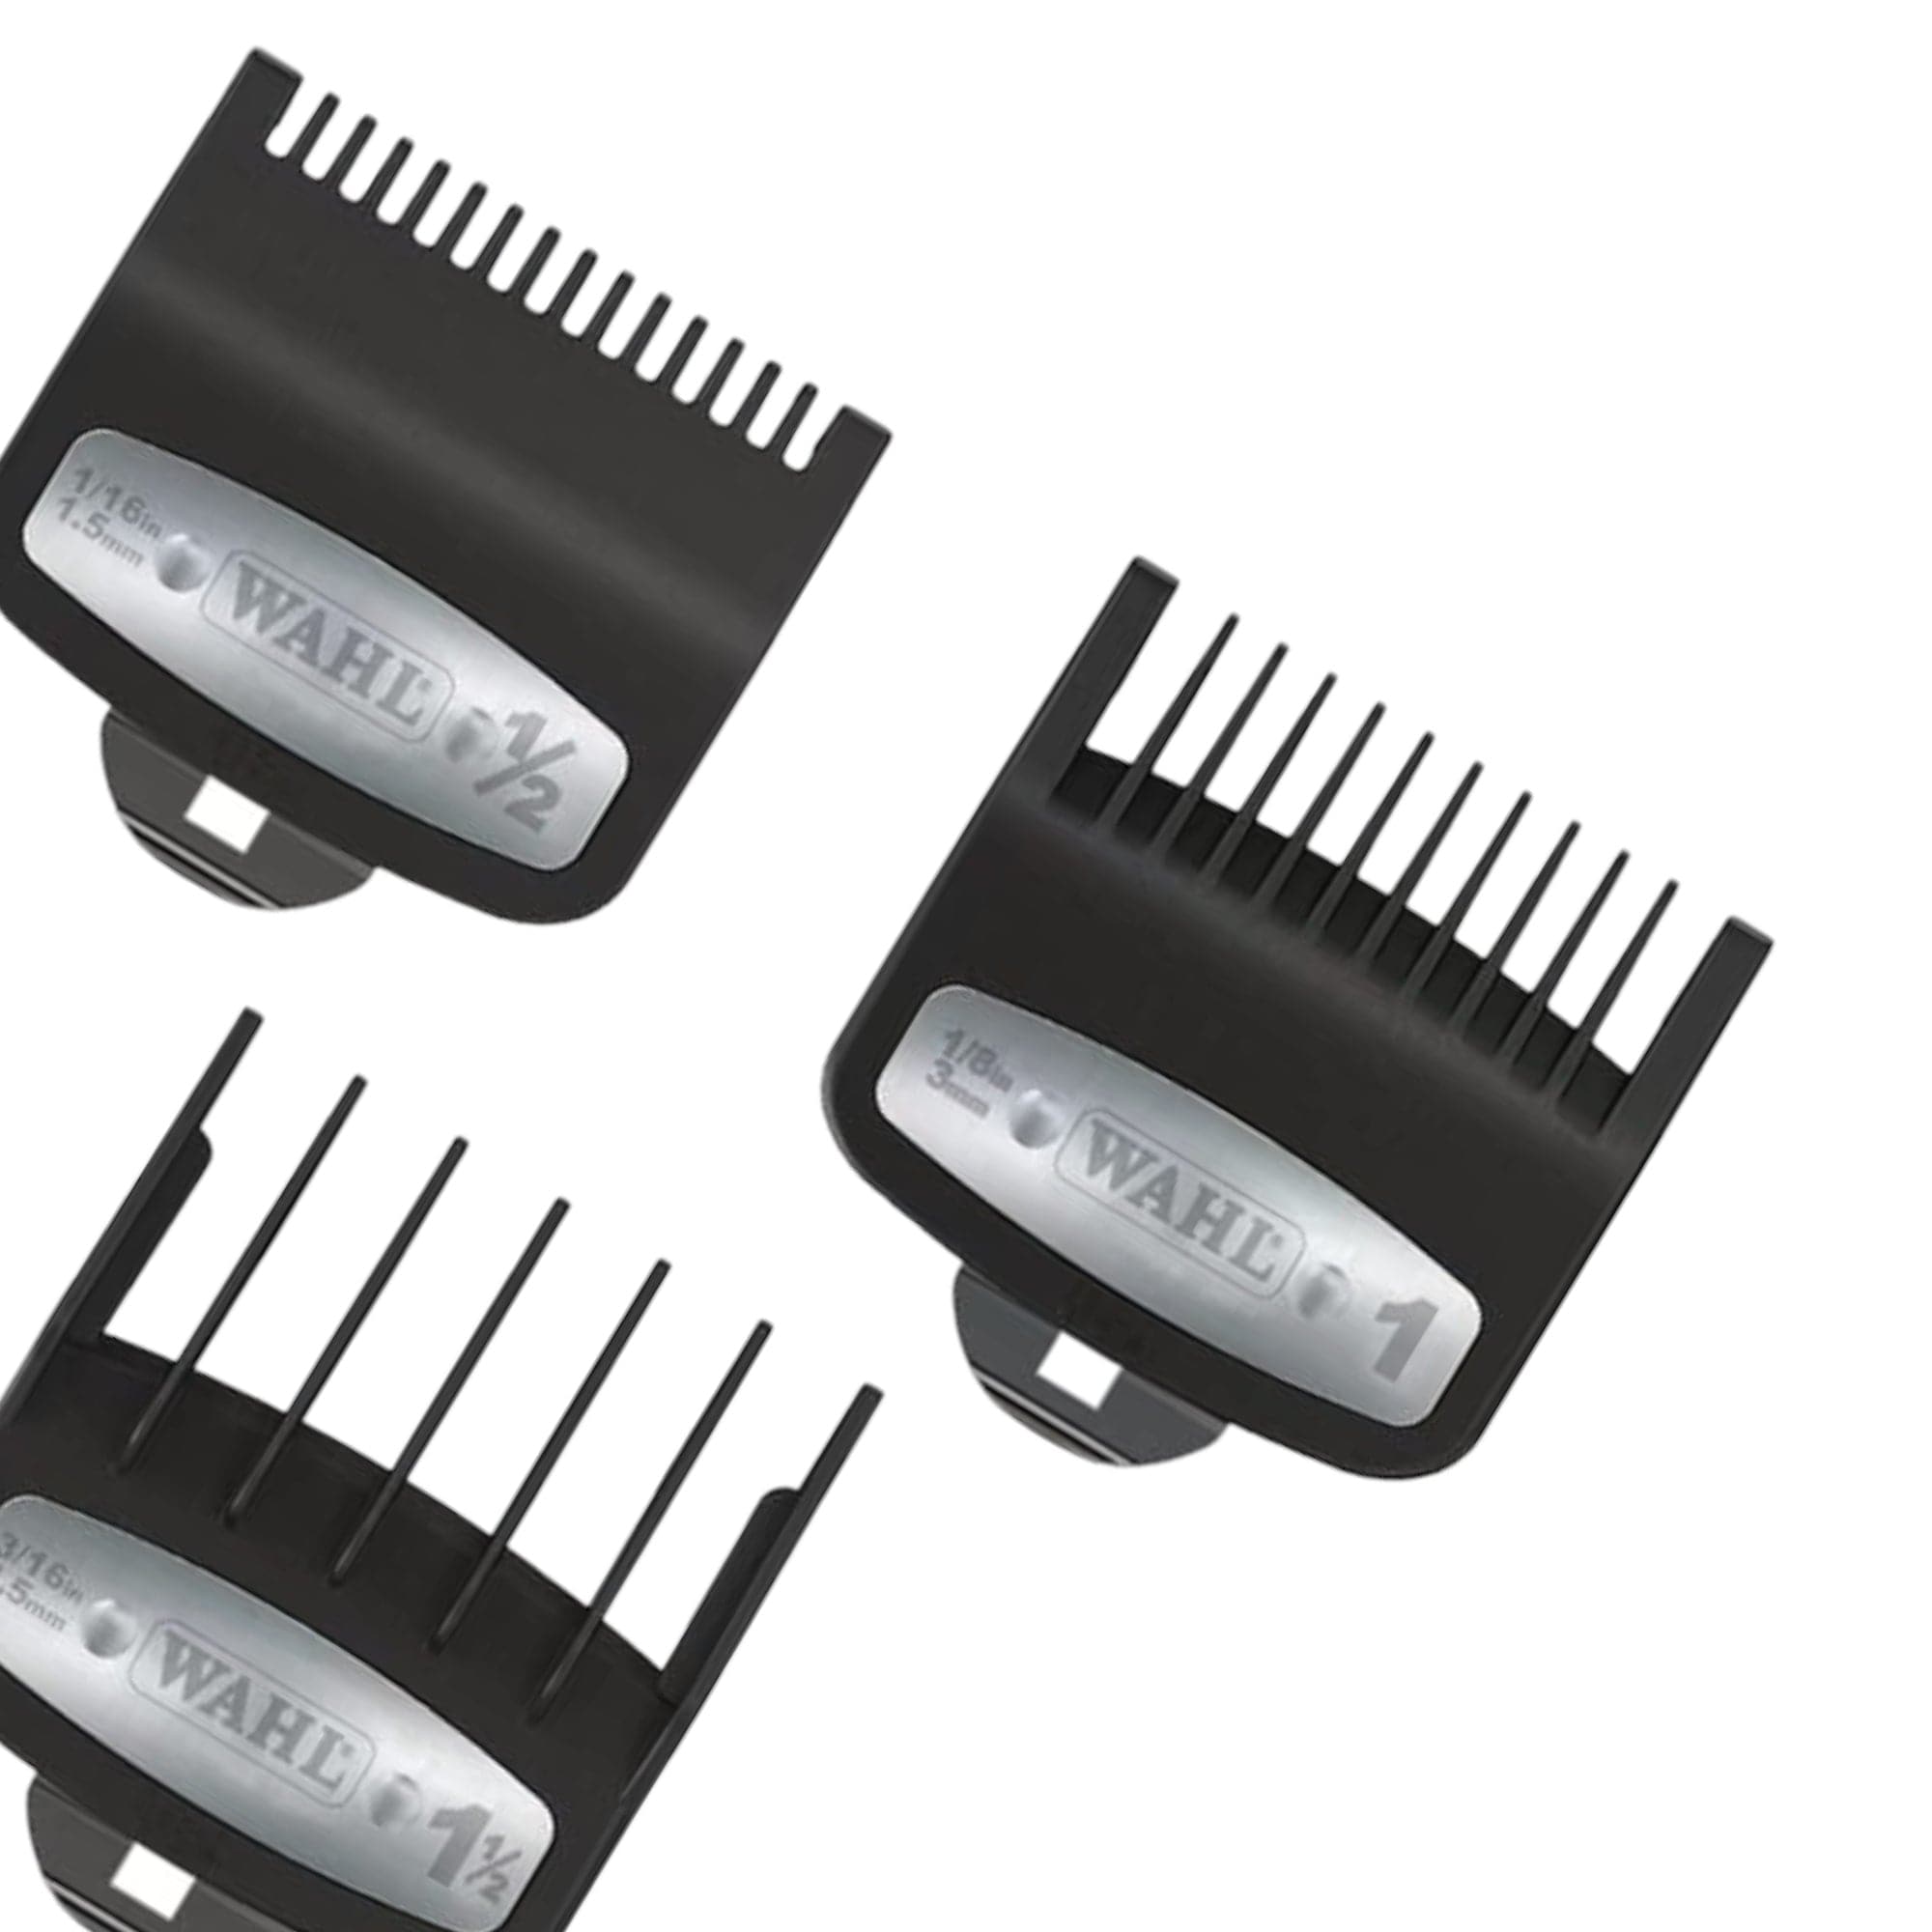 Wahl - Premium Cutting Guides Clipper Combs Guards (Set of 3) 3354-5001